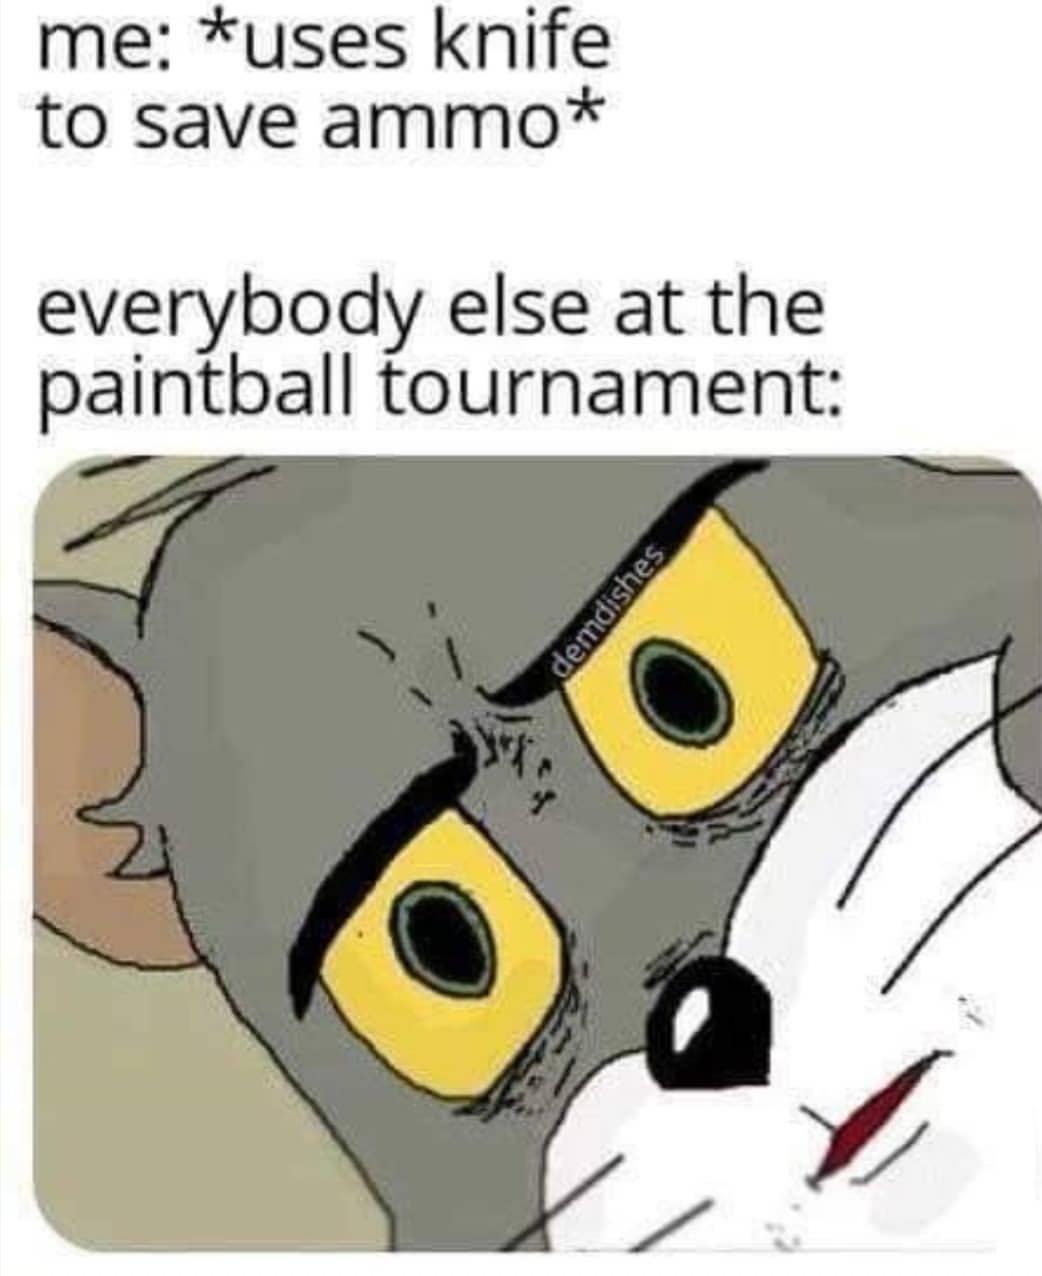 paintball knife meme - me uses knife to save ammo everybody else at the paintball tournament demdishes